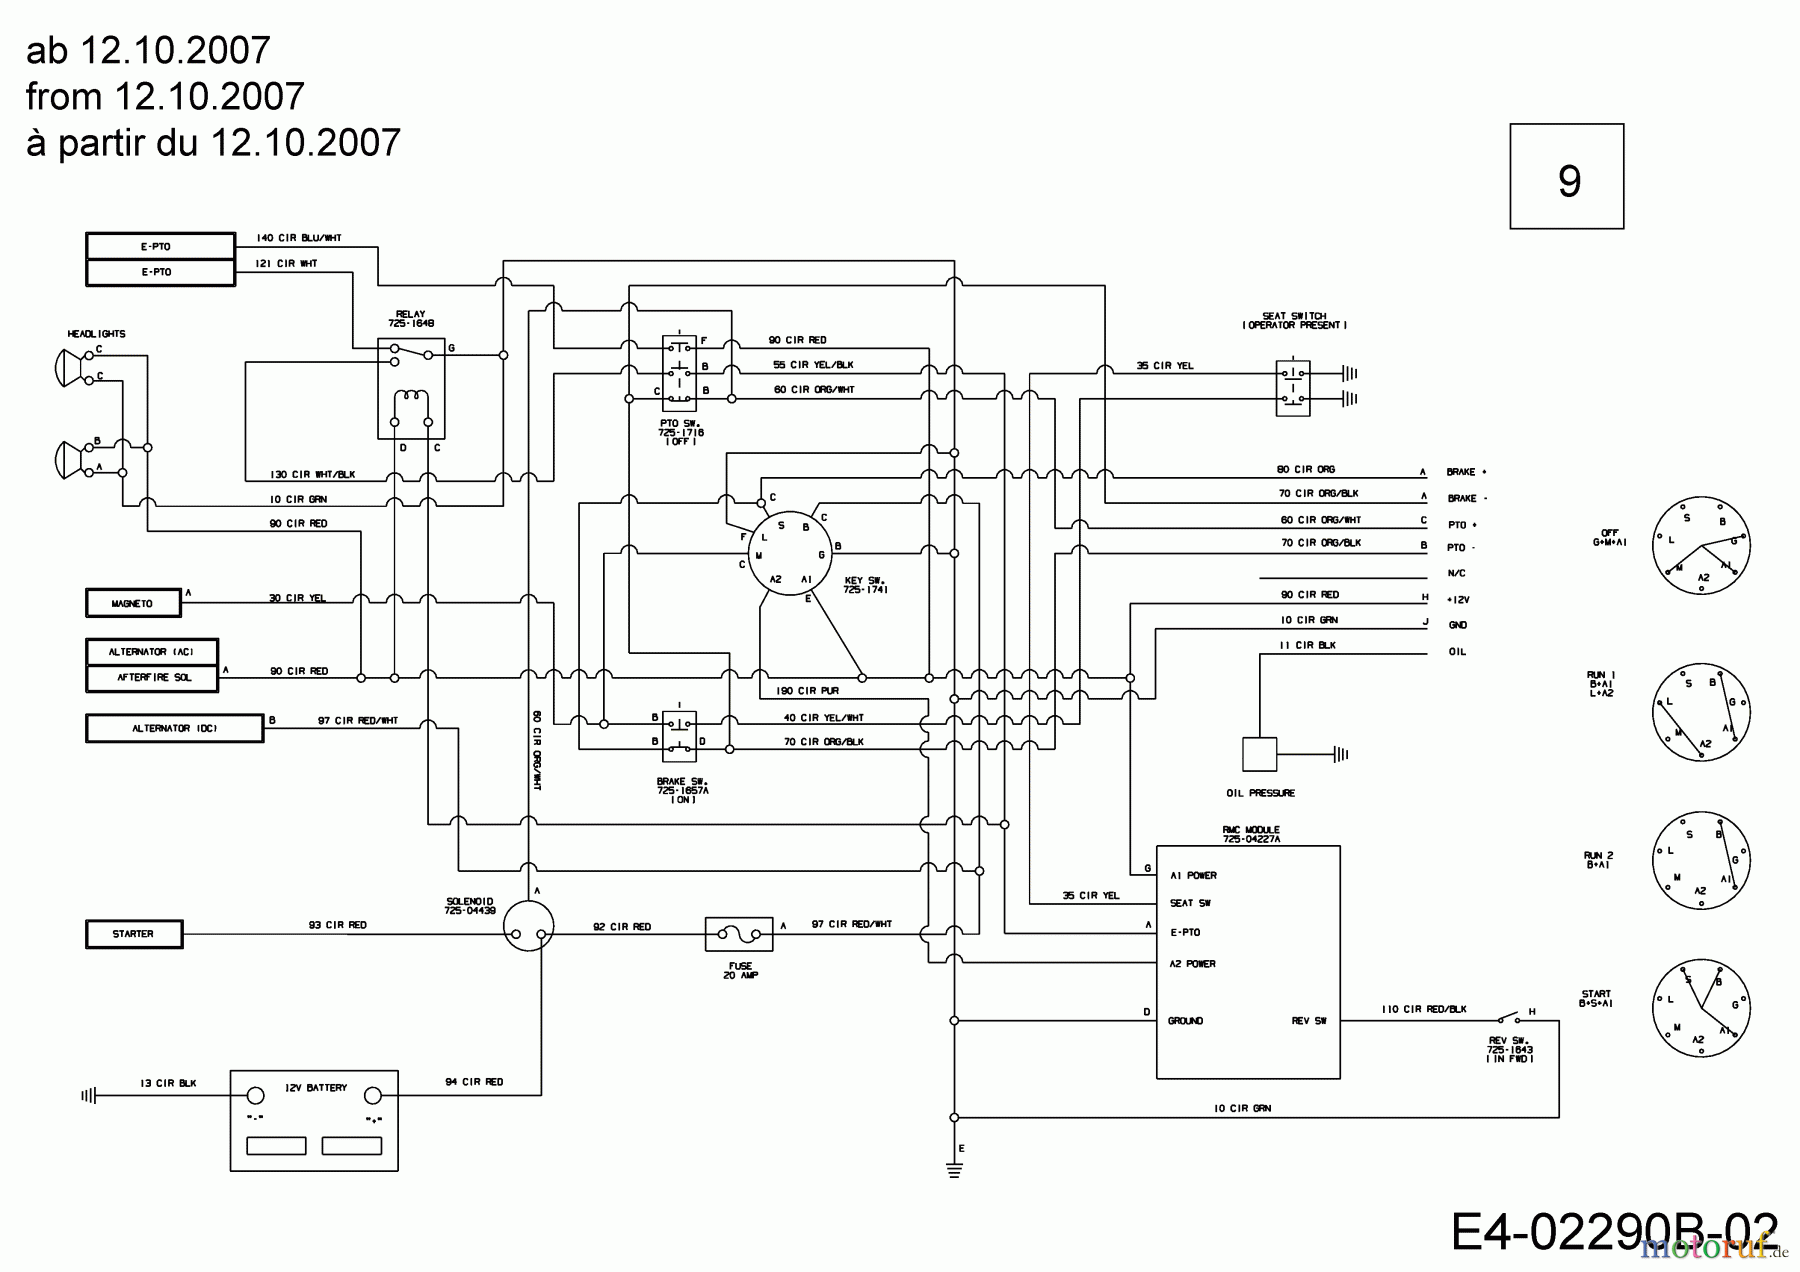  Cub Cadet Garden tractors GT 1225 14AI13CP603  (2008) Wiring diagram from 12.10.2007